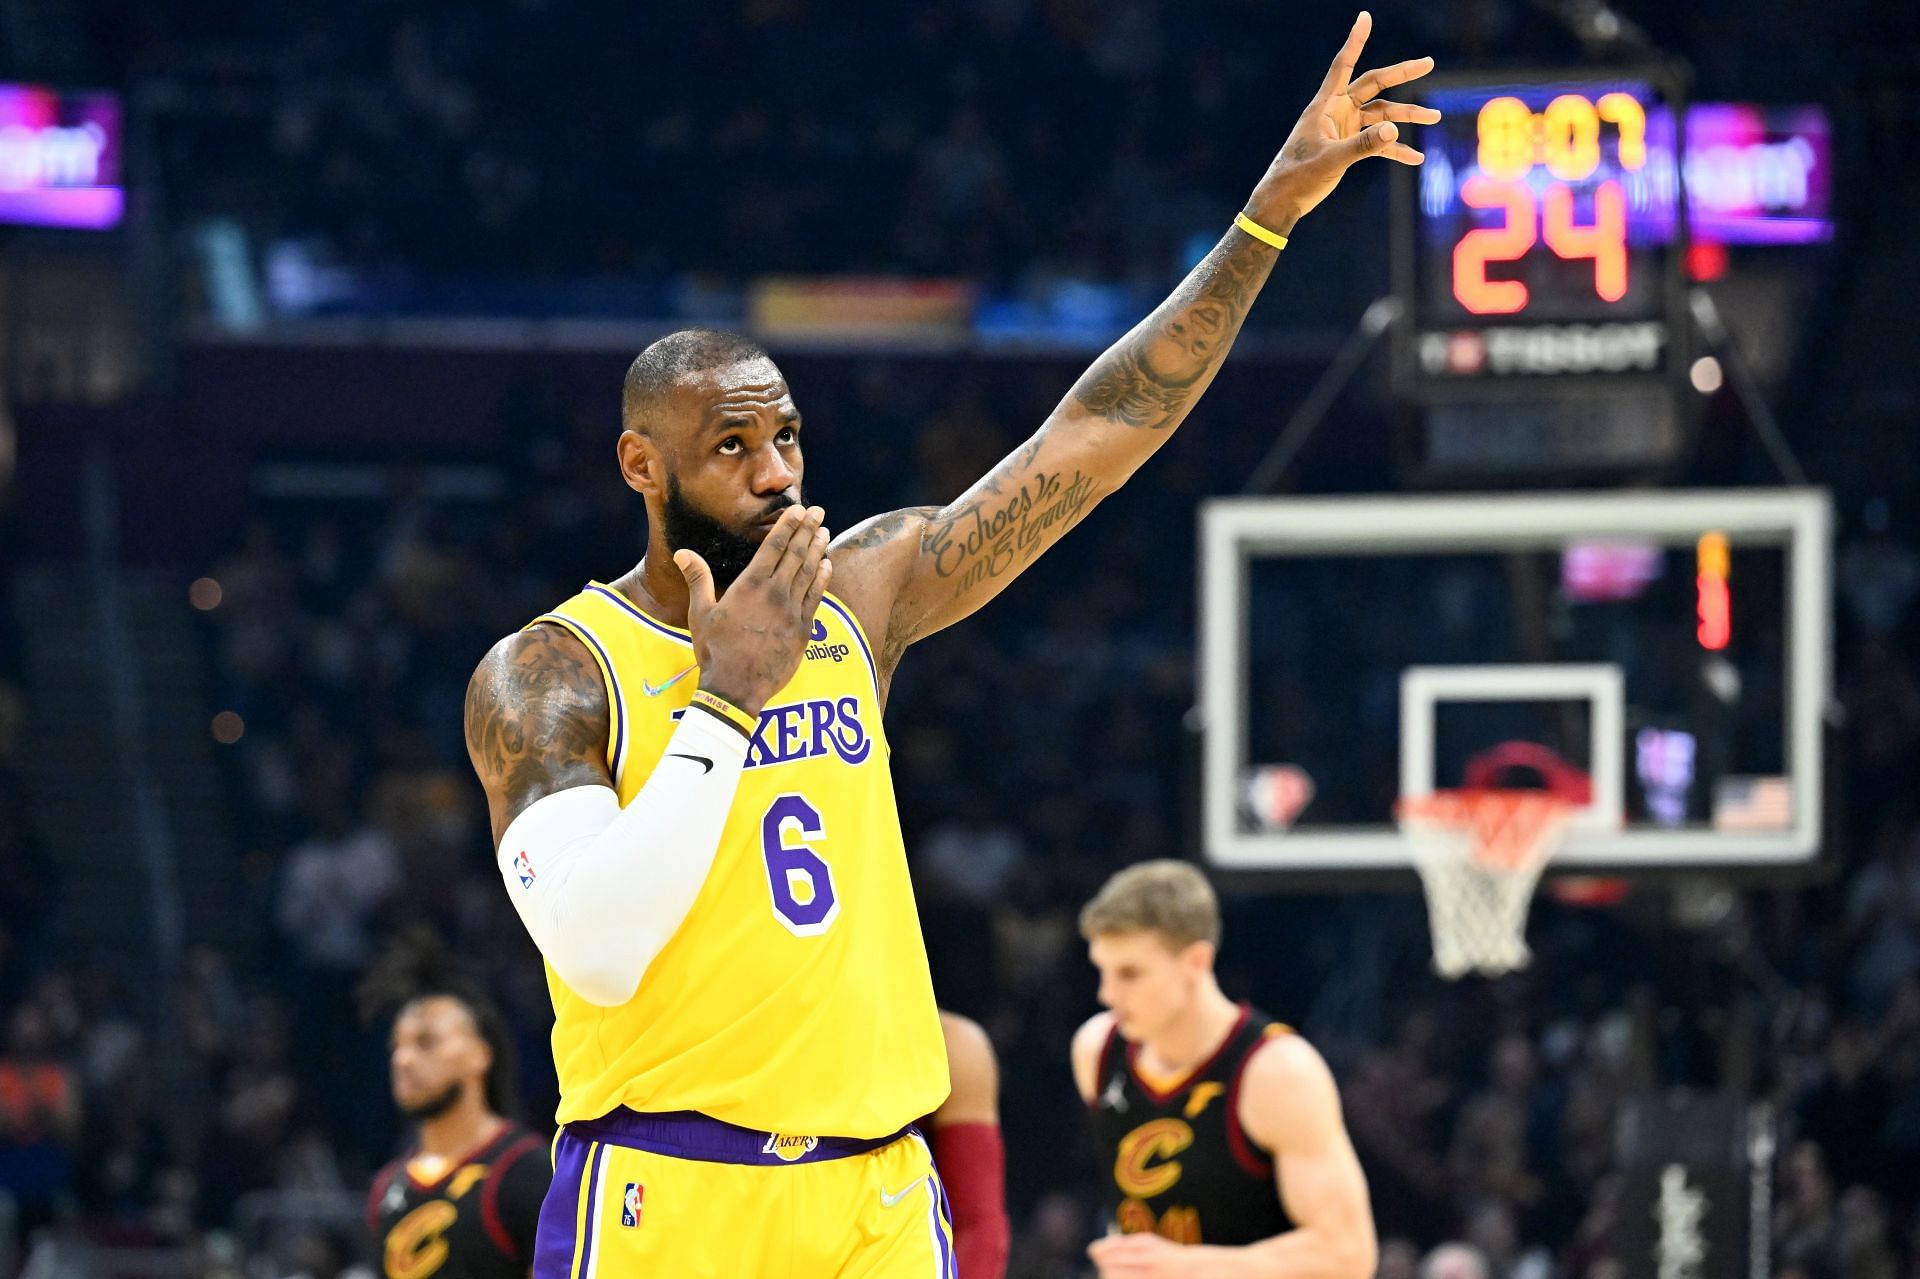 Lakers head coach Darvin Ham to lessen LeBron James&rsquo; load next season, Kevin Garnett lauds LA&rsquo;s decision to get Rasheed Wallace